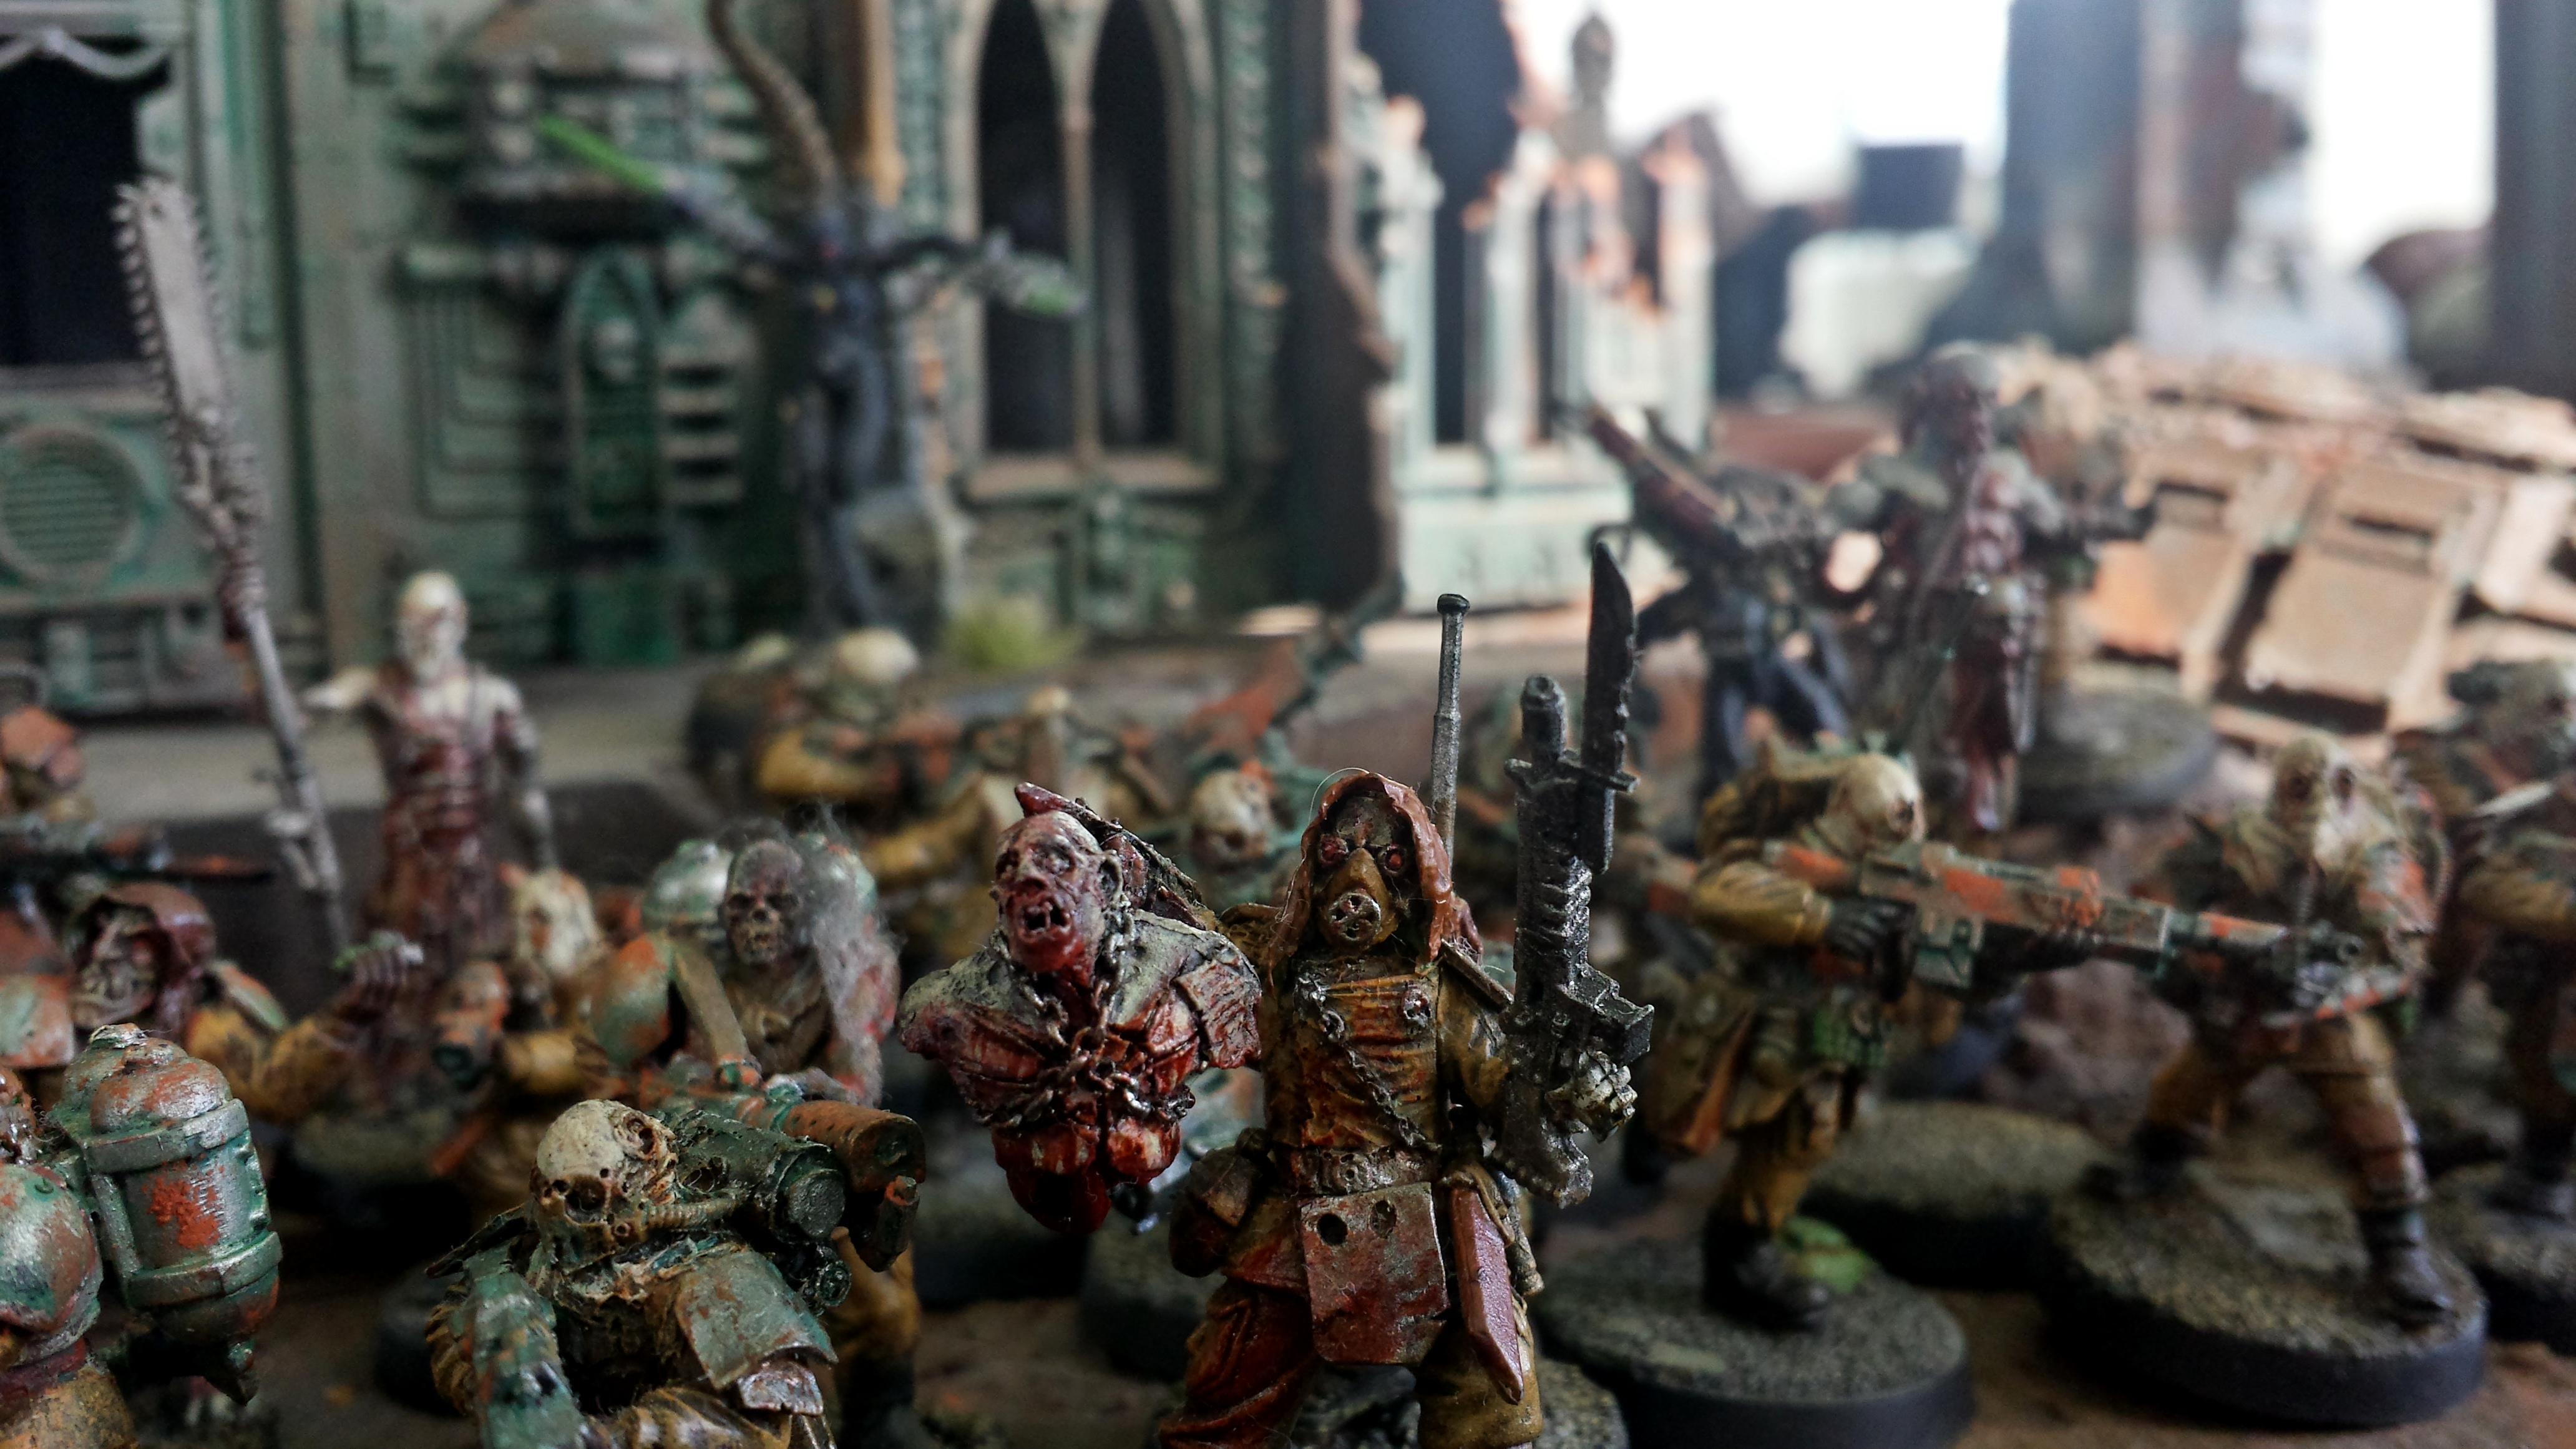 Apostles Of Contagion, Assassins, Chaos, Forge World, Nurgle, Renegades, Warhammer 40,000